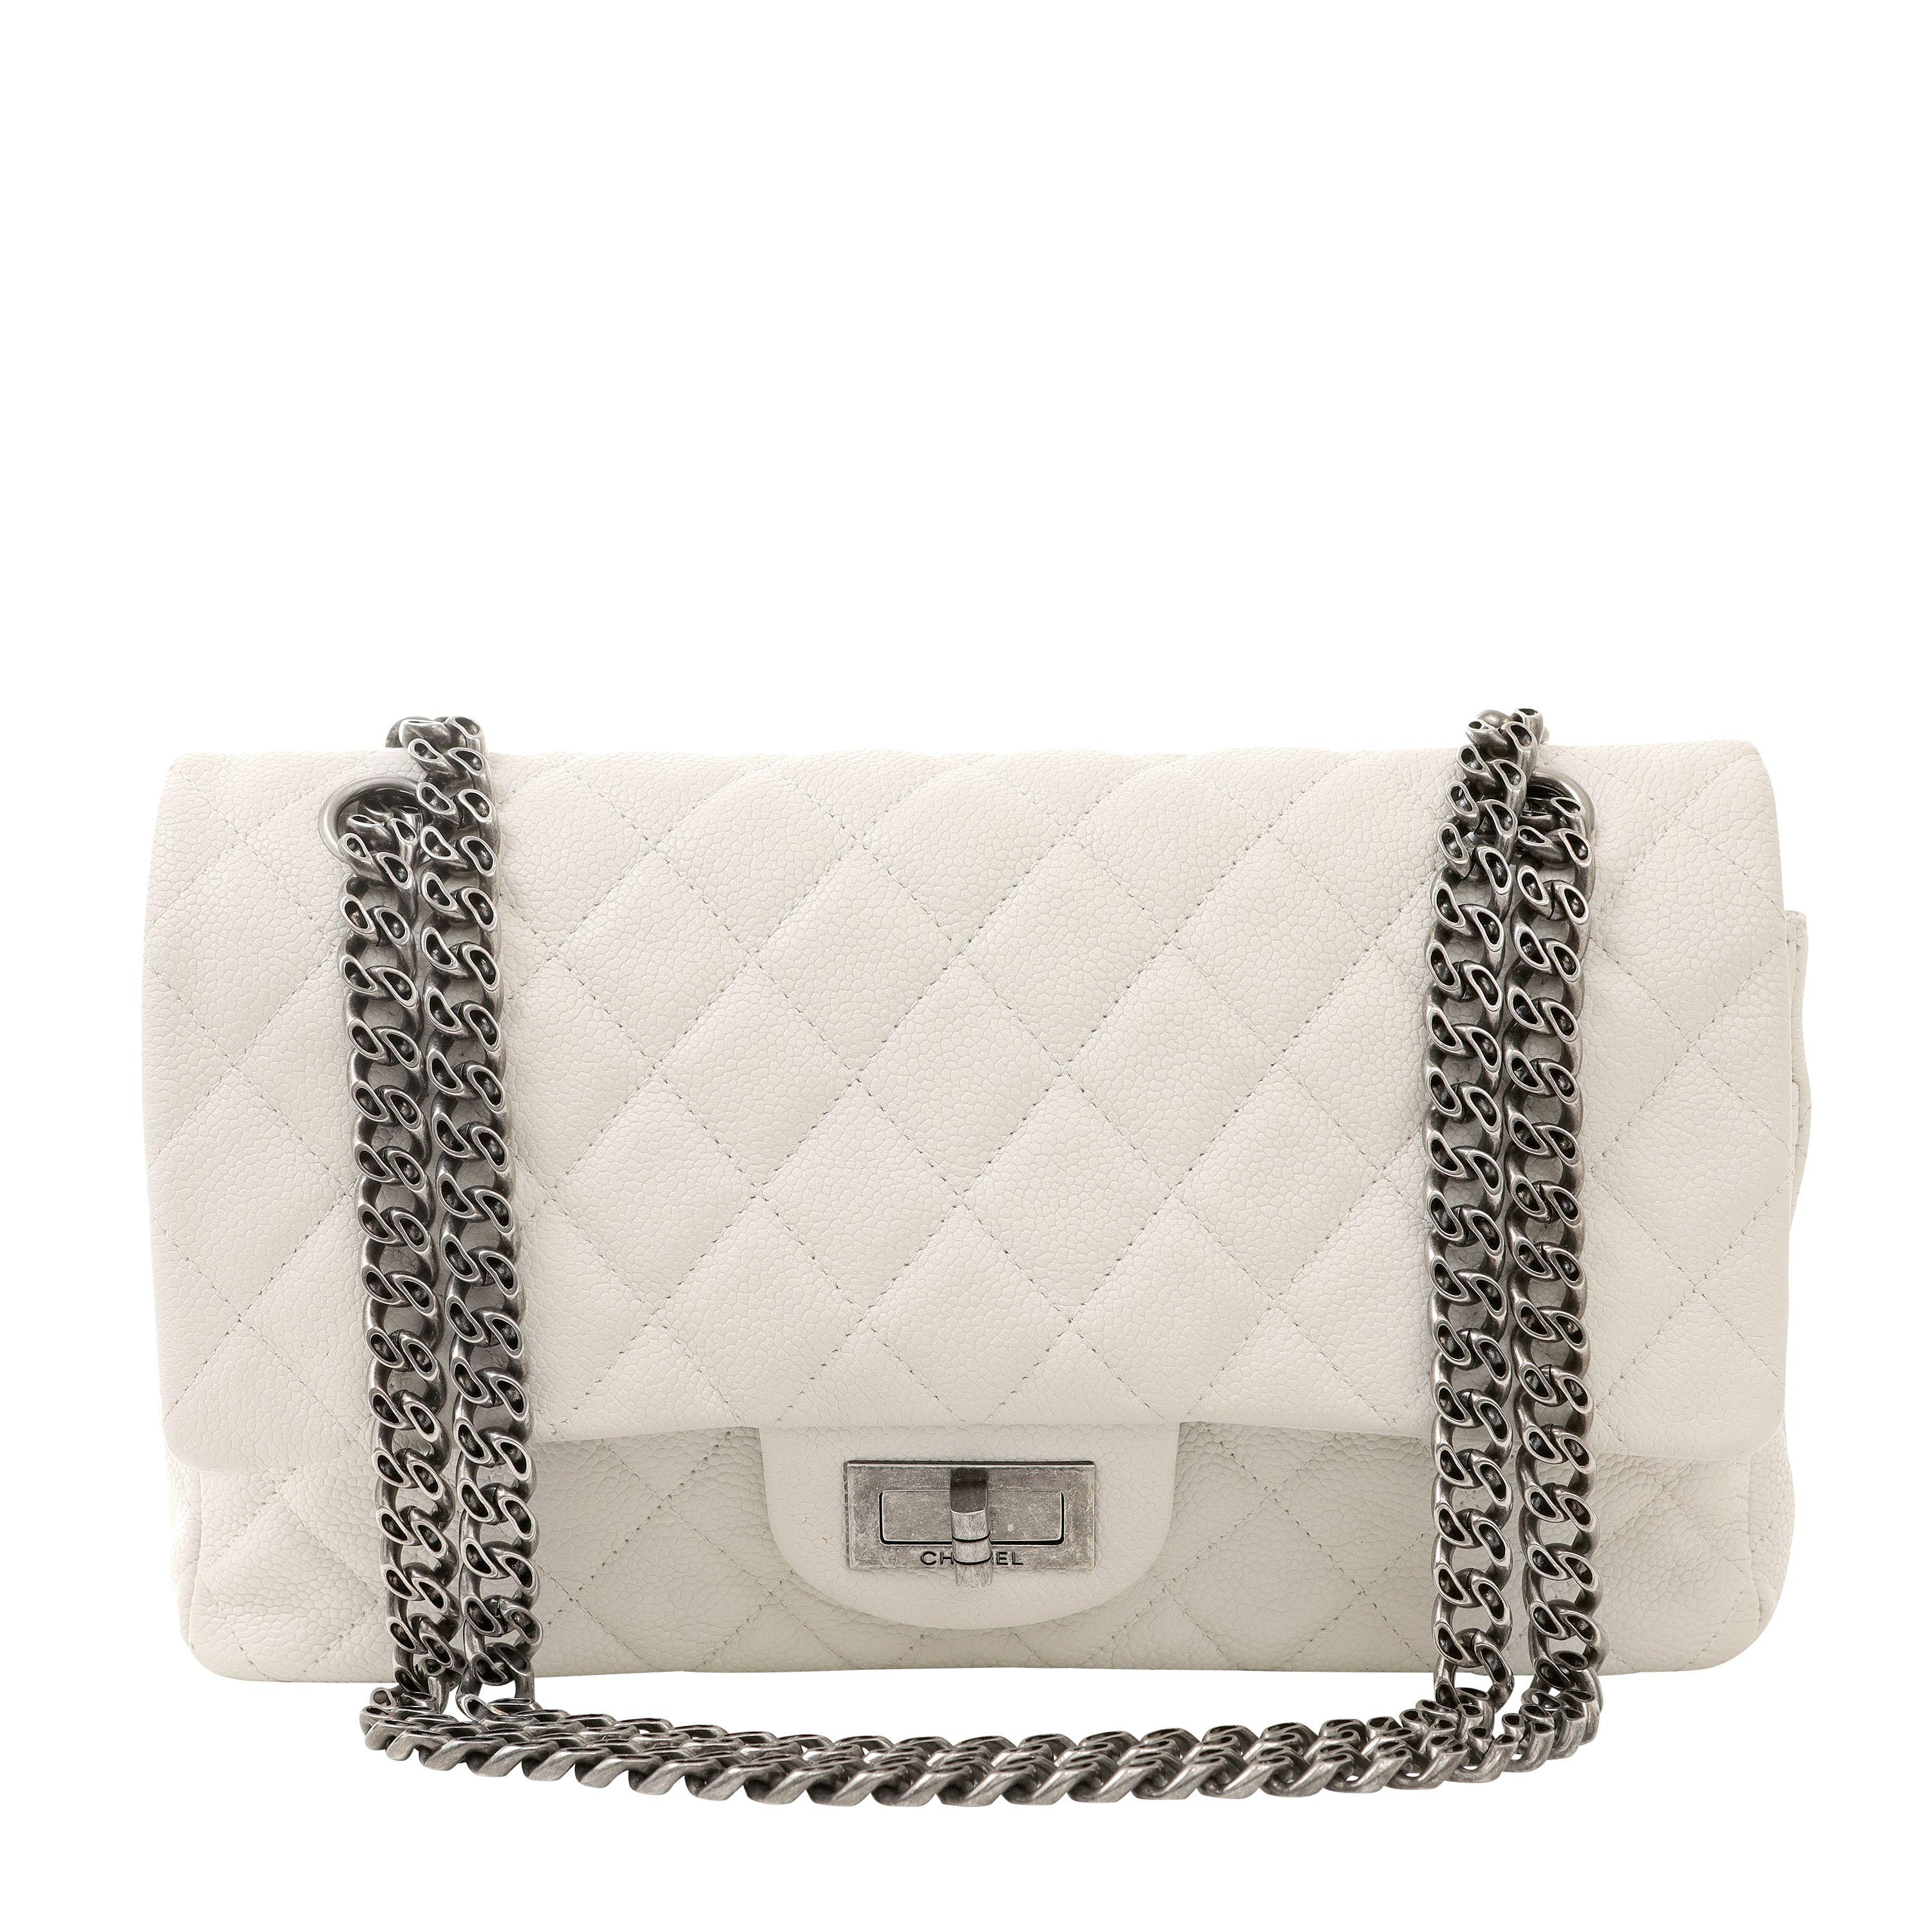 Chanel Ivory Grey Caviar Medium 2.55 Reissue with Ruthenium Hardware In Good Condition For Sale In Palm Beach, FL